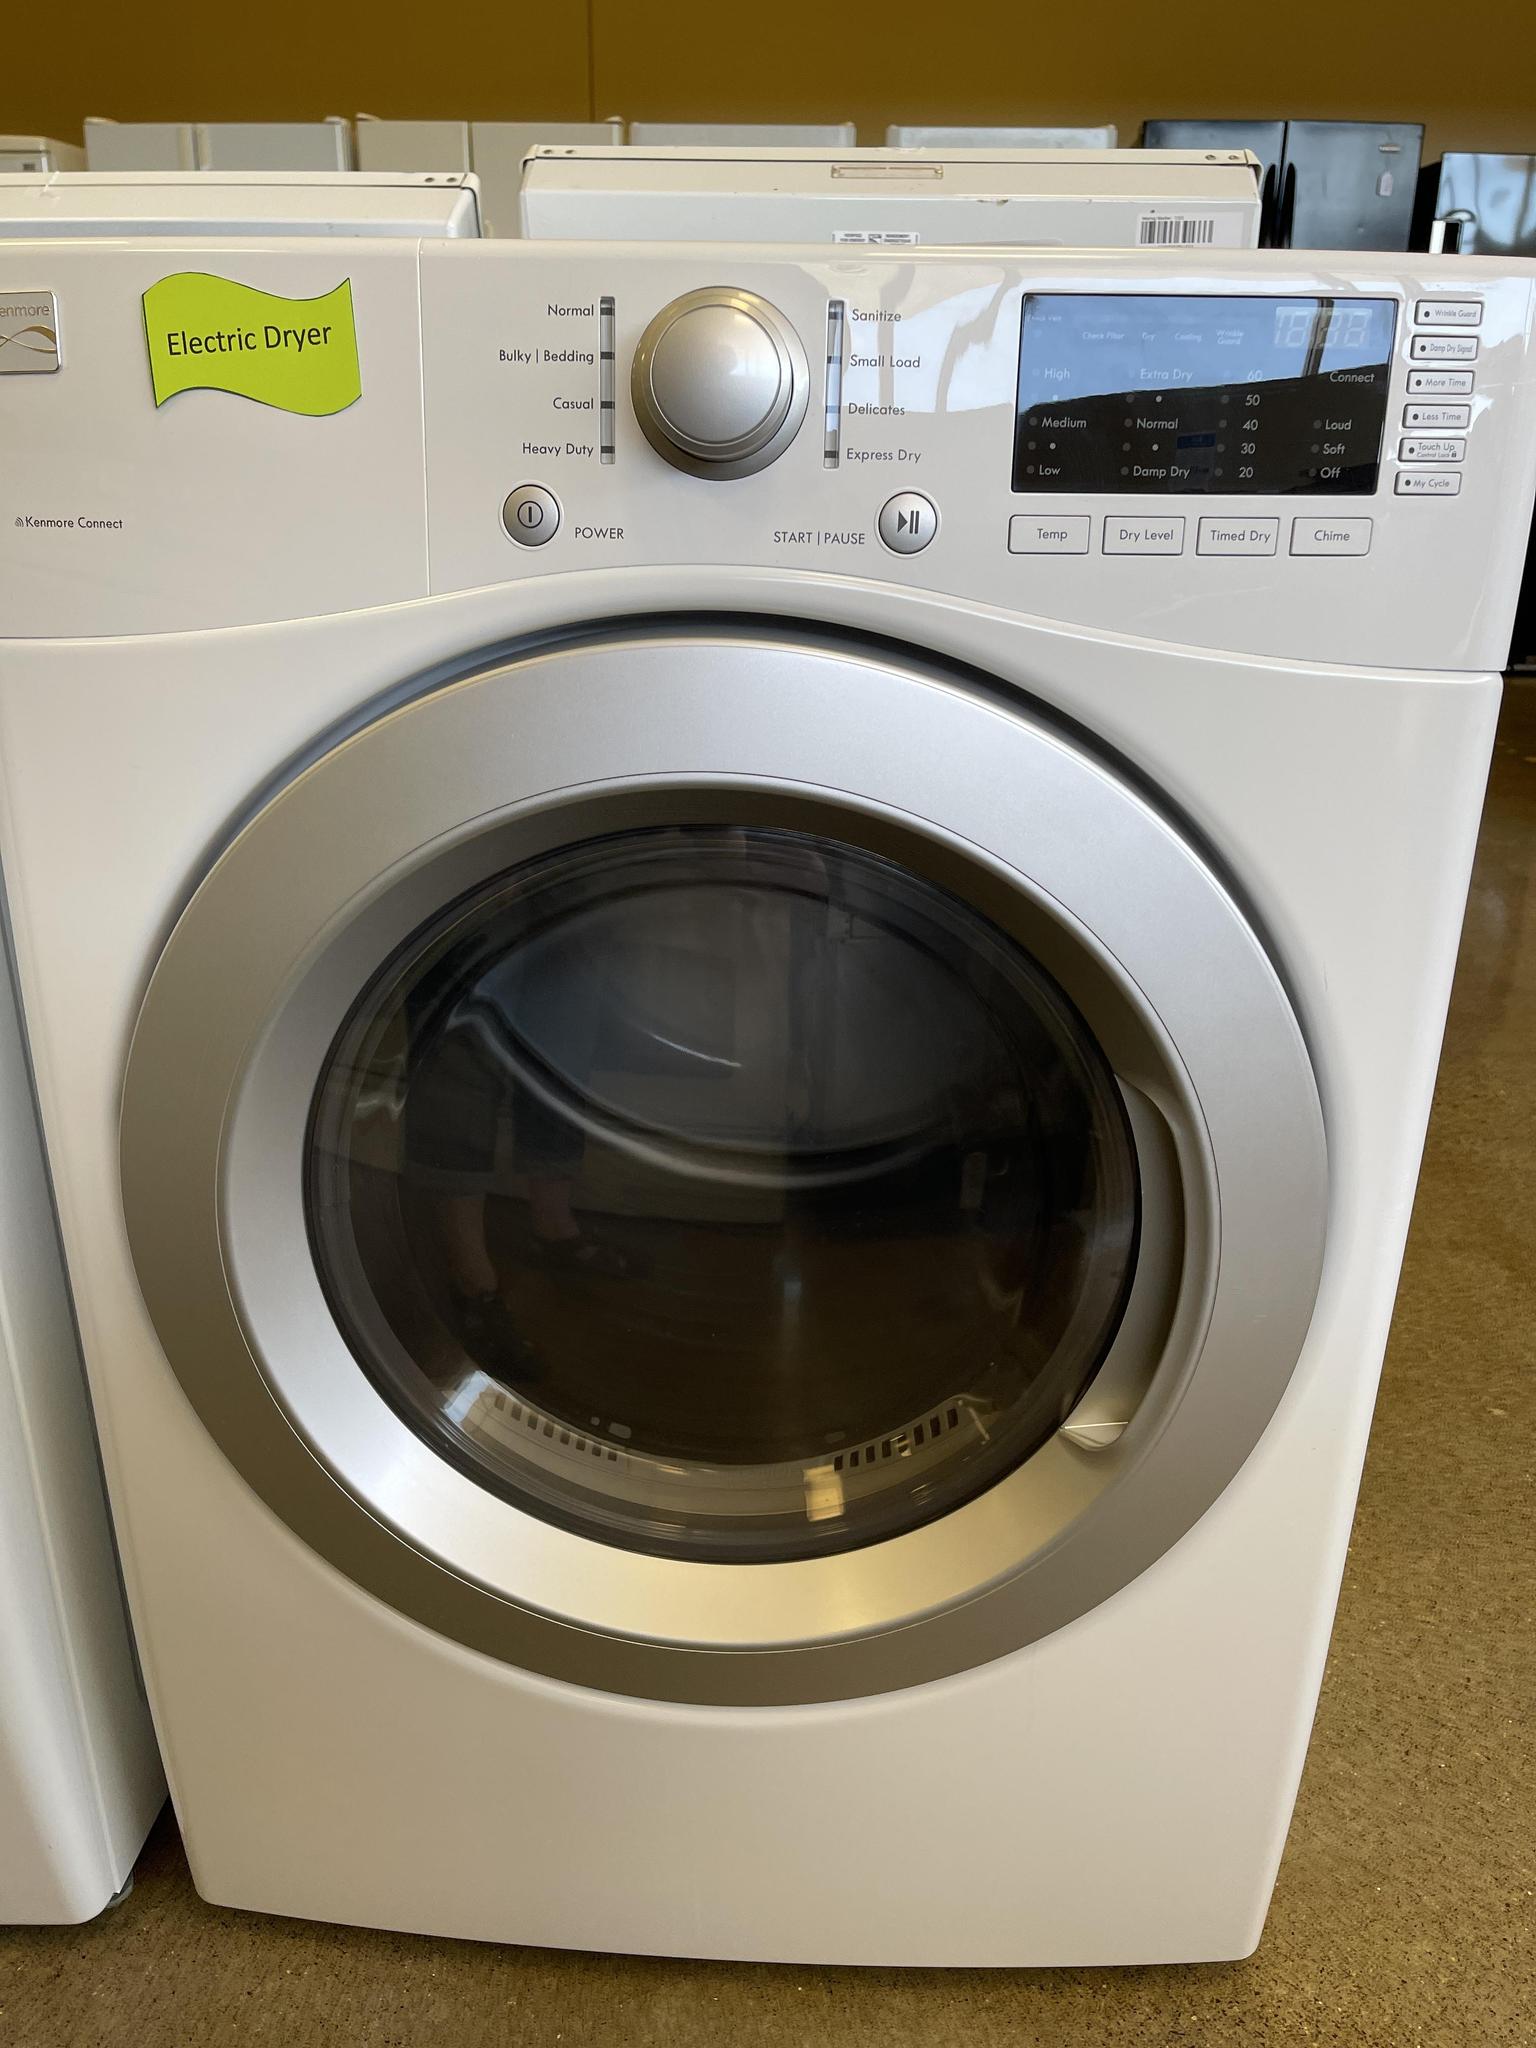 LG DLE3500W Dryer Review - Reviewed